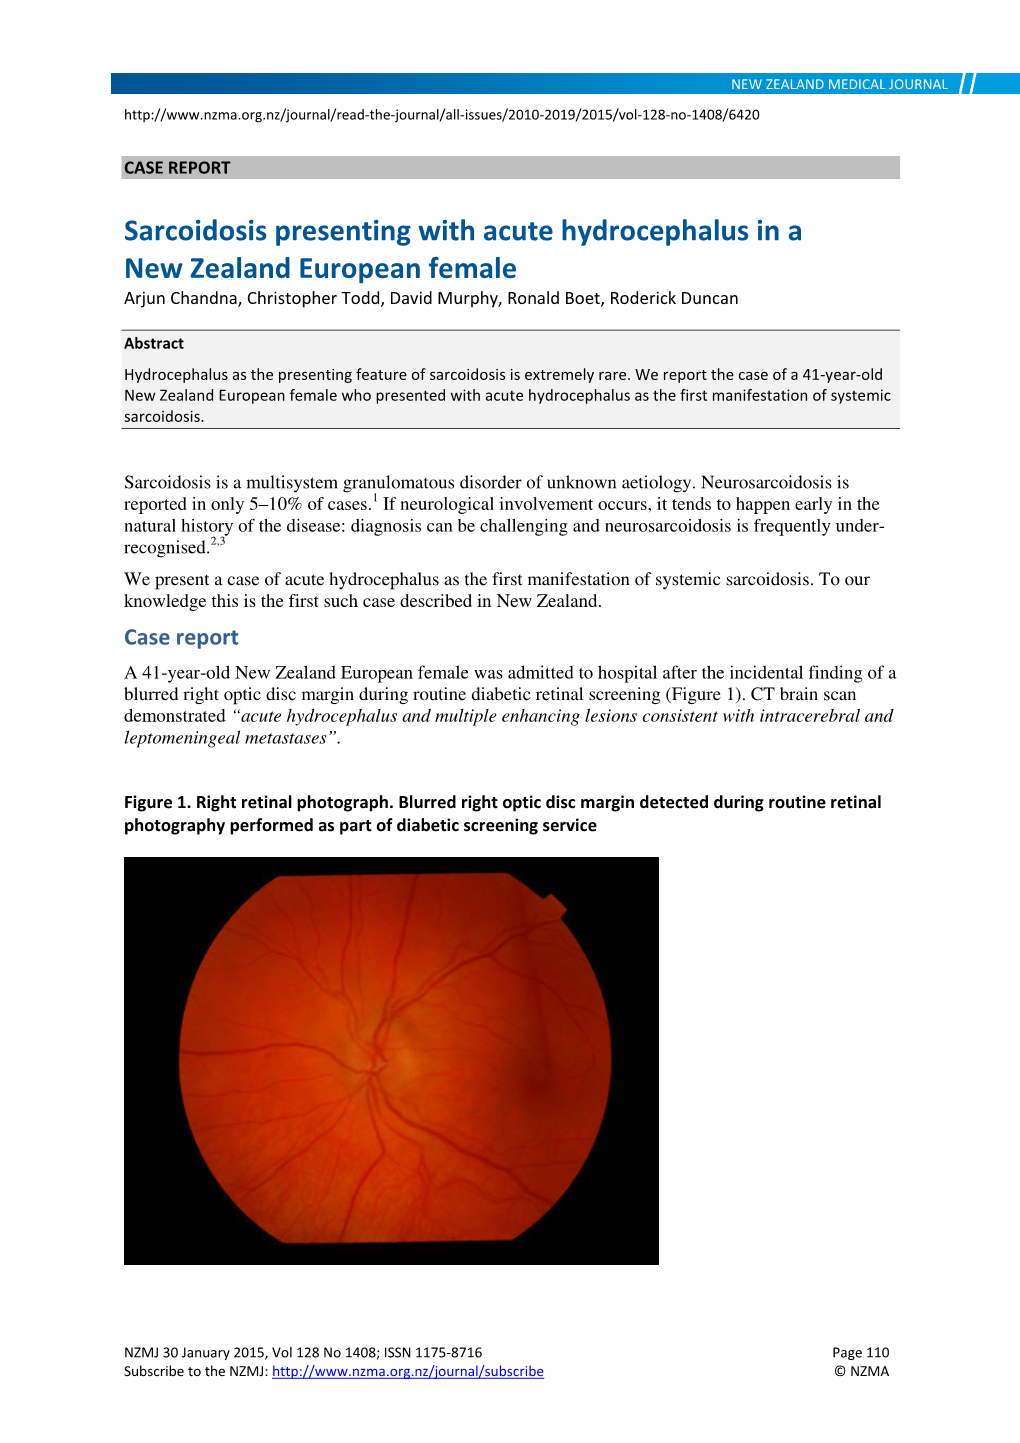 Sarcoidosis Presenting with Acute Hydrocephalus in a New Zealand European Female Arjun Chandna, Christopher Todd, David Murphy, Ronald Boet, Roderick Duncan